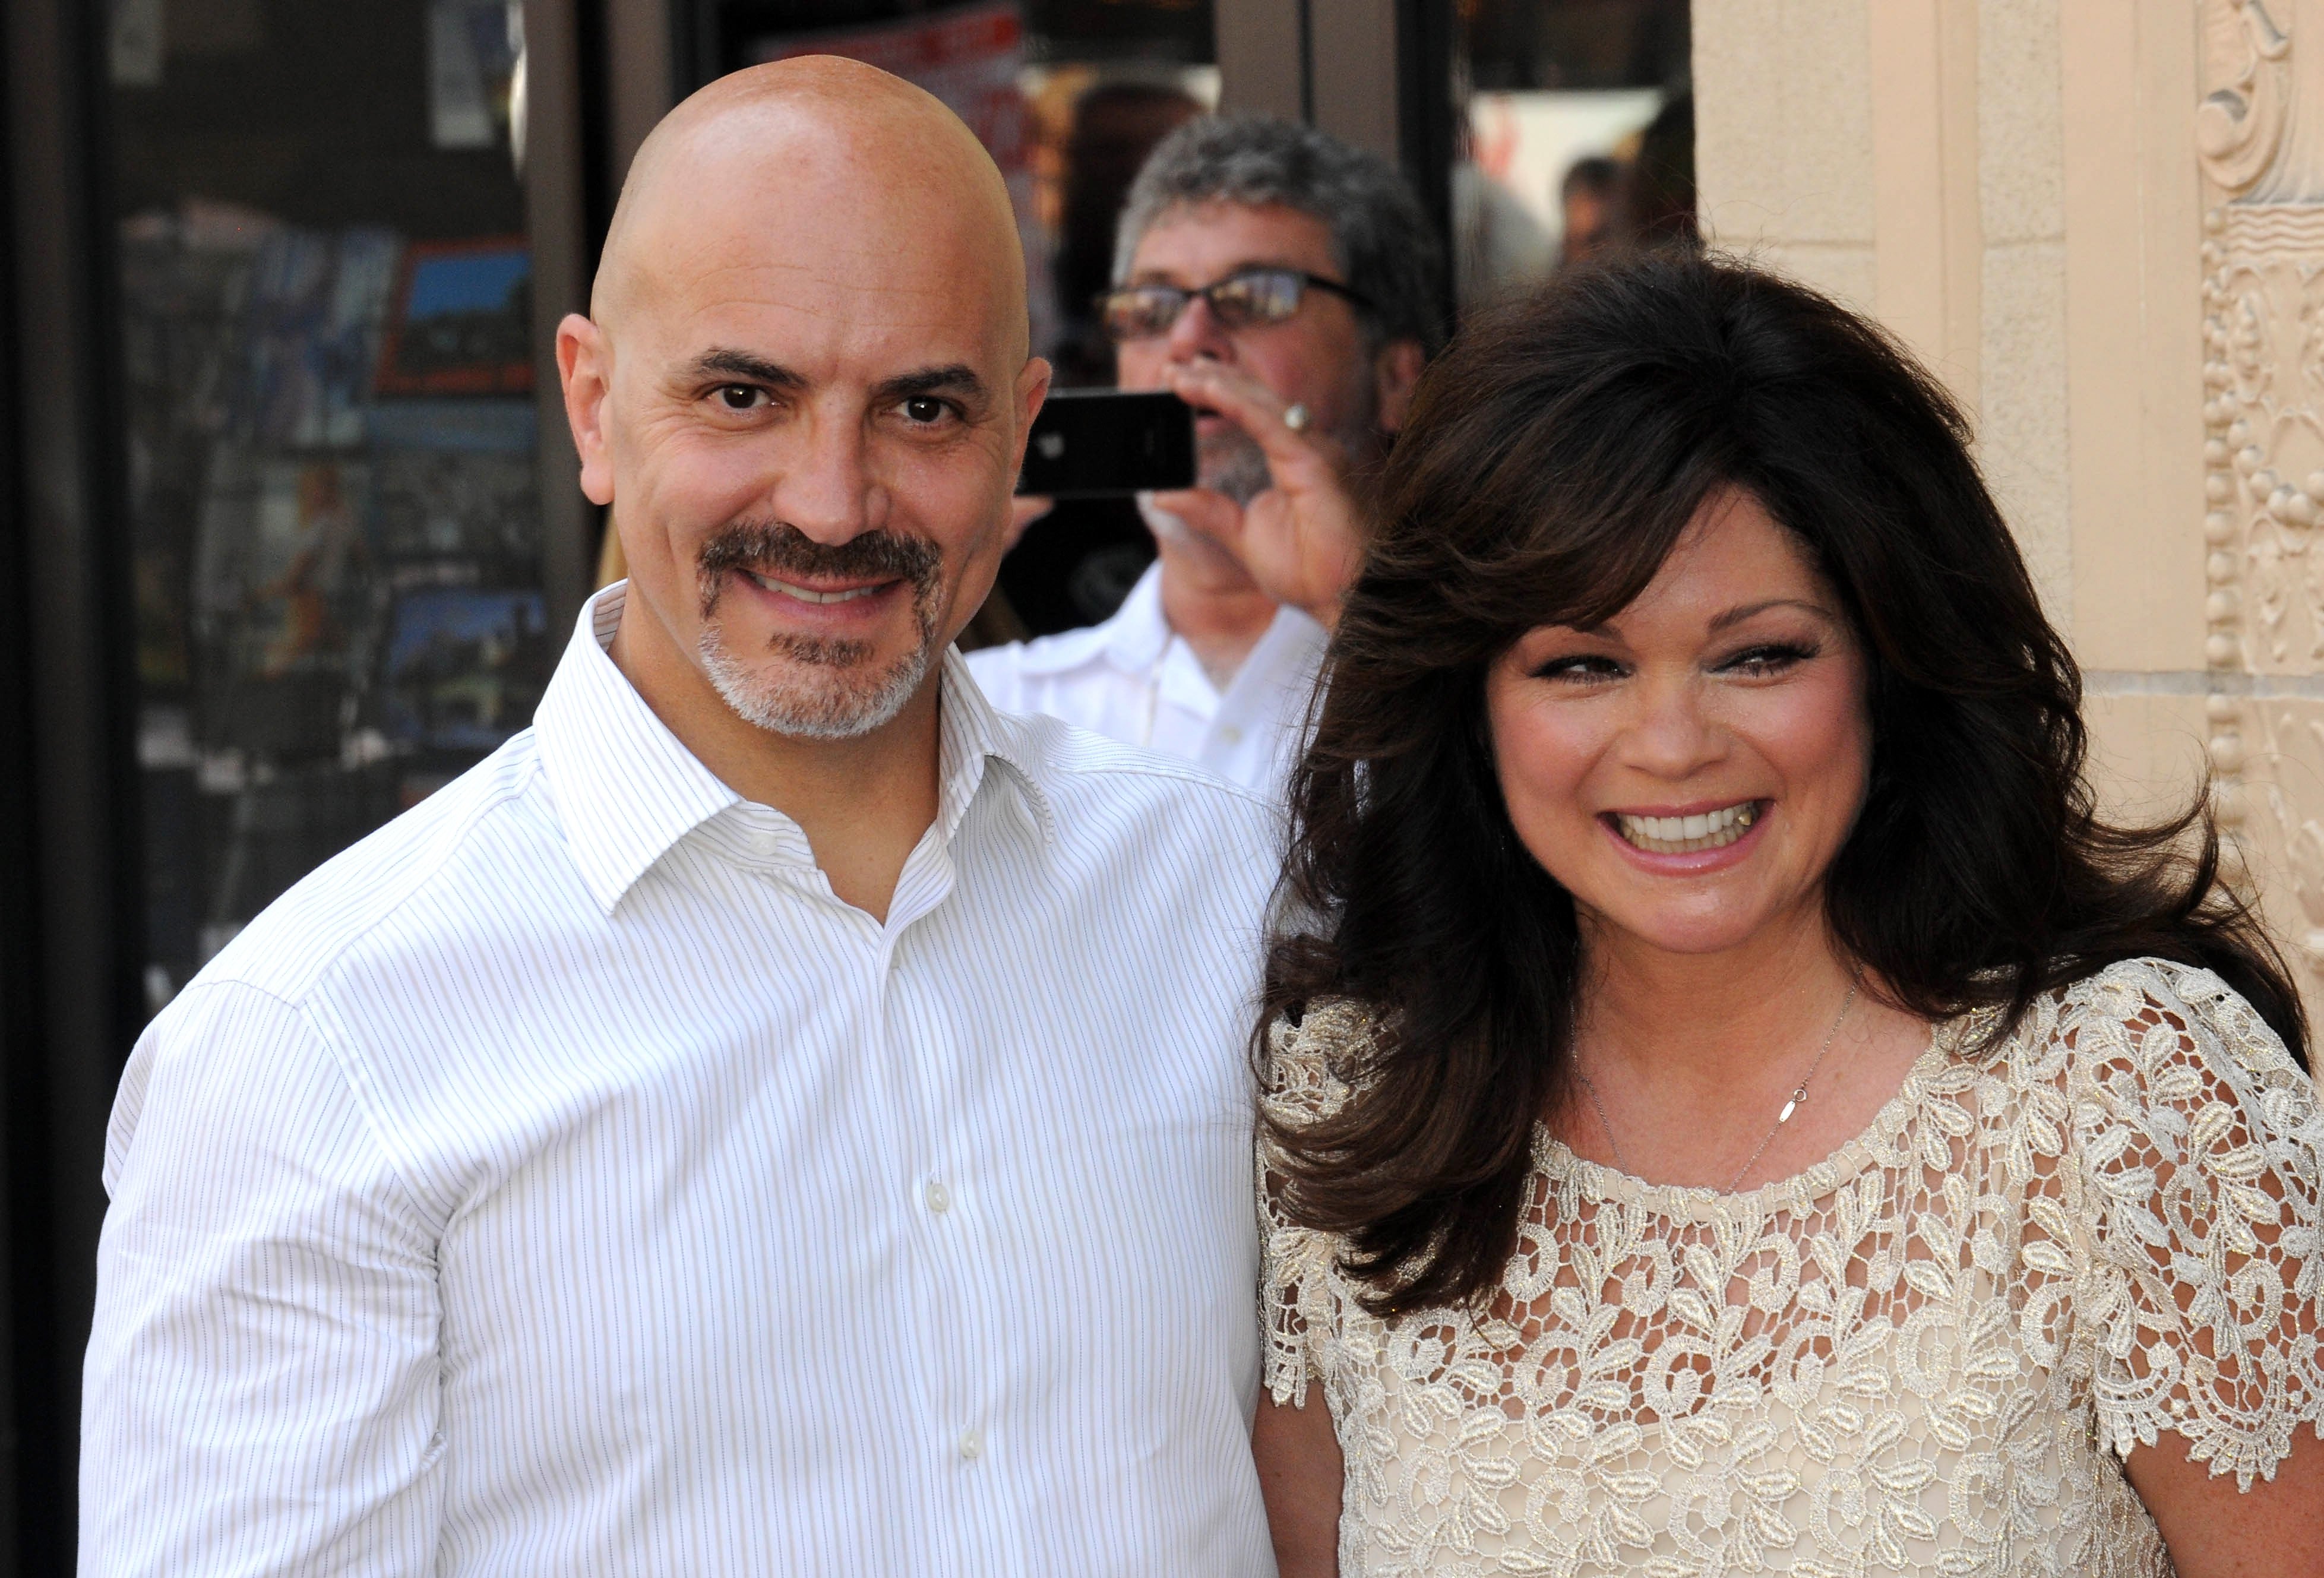 Actor Valerie Bertinelli, right, with husband Tom Vitale in 2012, during Hollywood Walk of Fame ceremony honoring the former 'One Day at a Time' star.